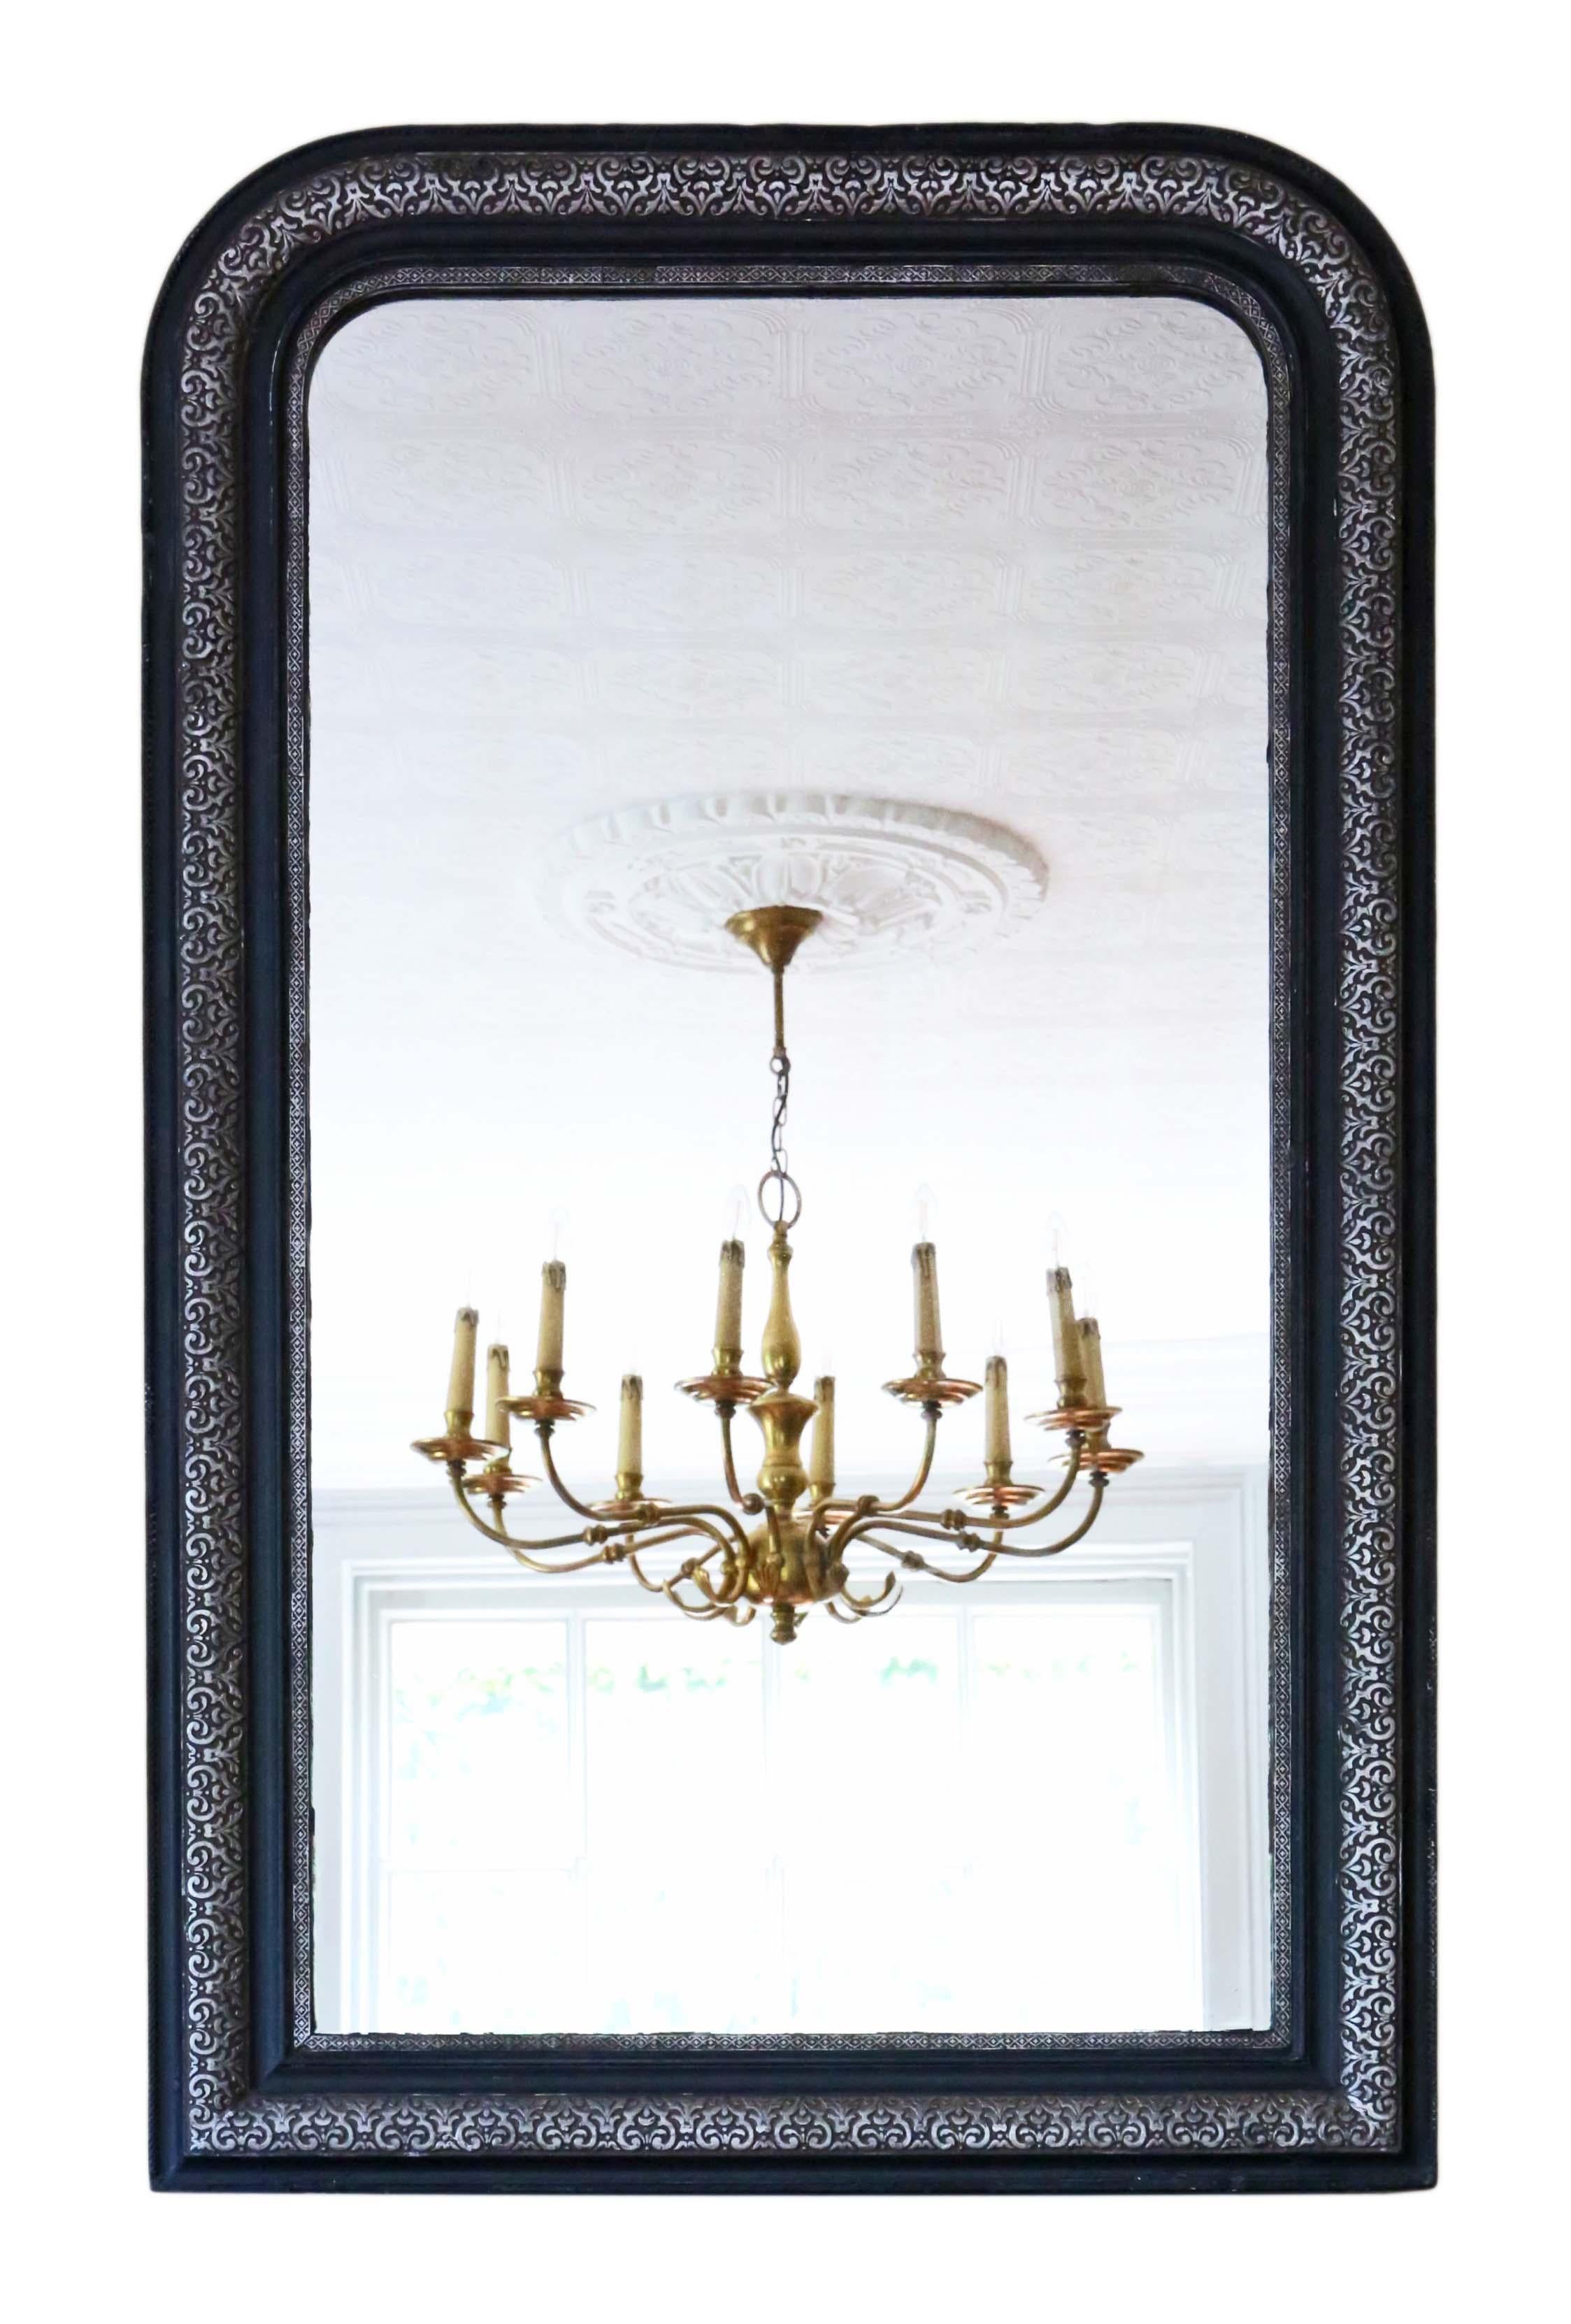 Antique Large Ebonised Silver Gilt Wall Mirror Overmantle Late 19th Century For Sale 4